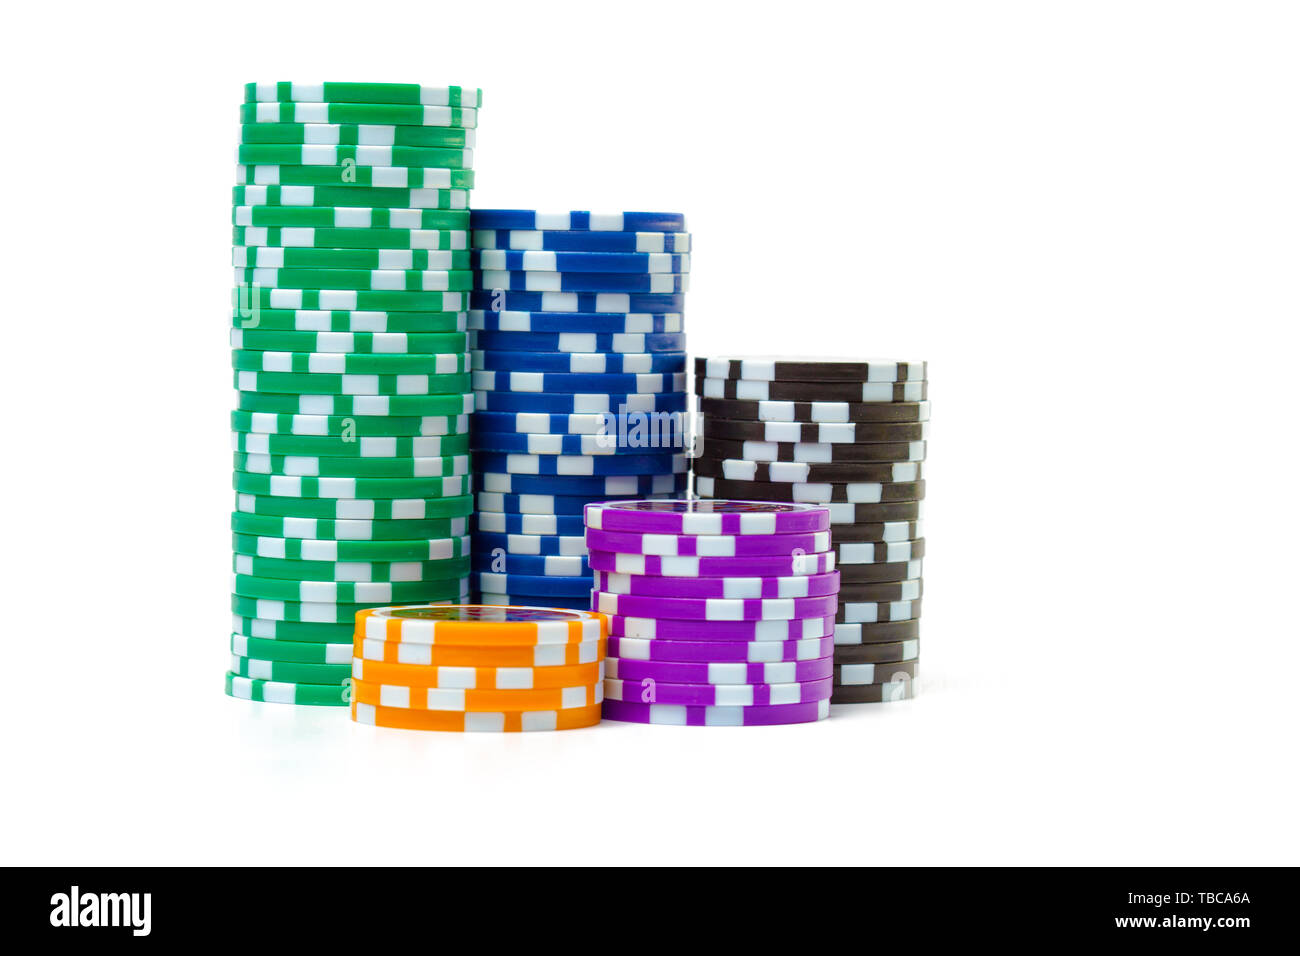 Stacks of poker chips isolated on white background Stock Photo